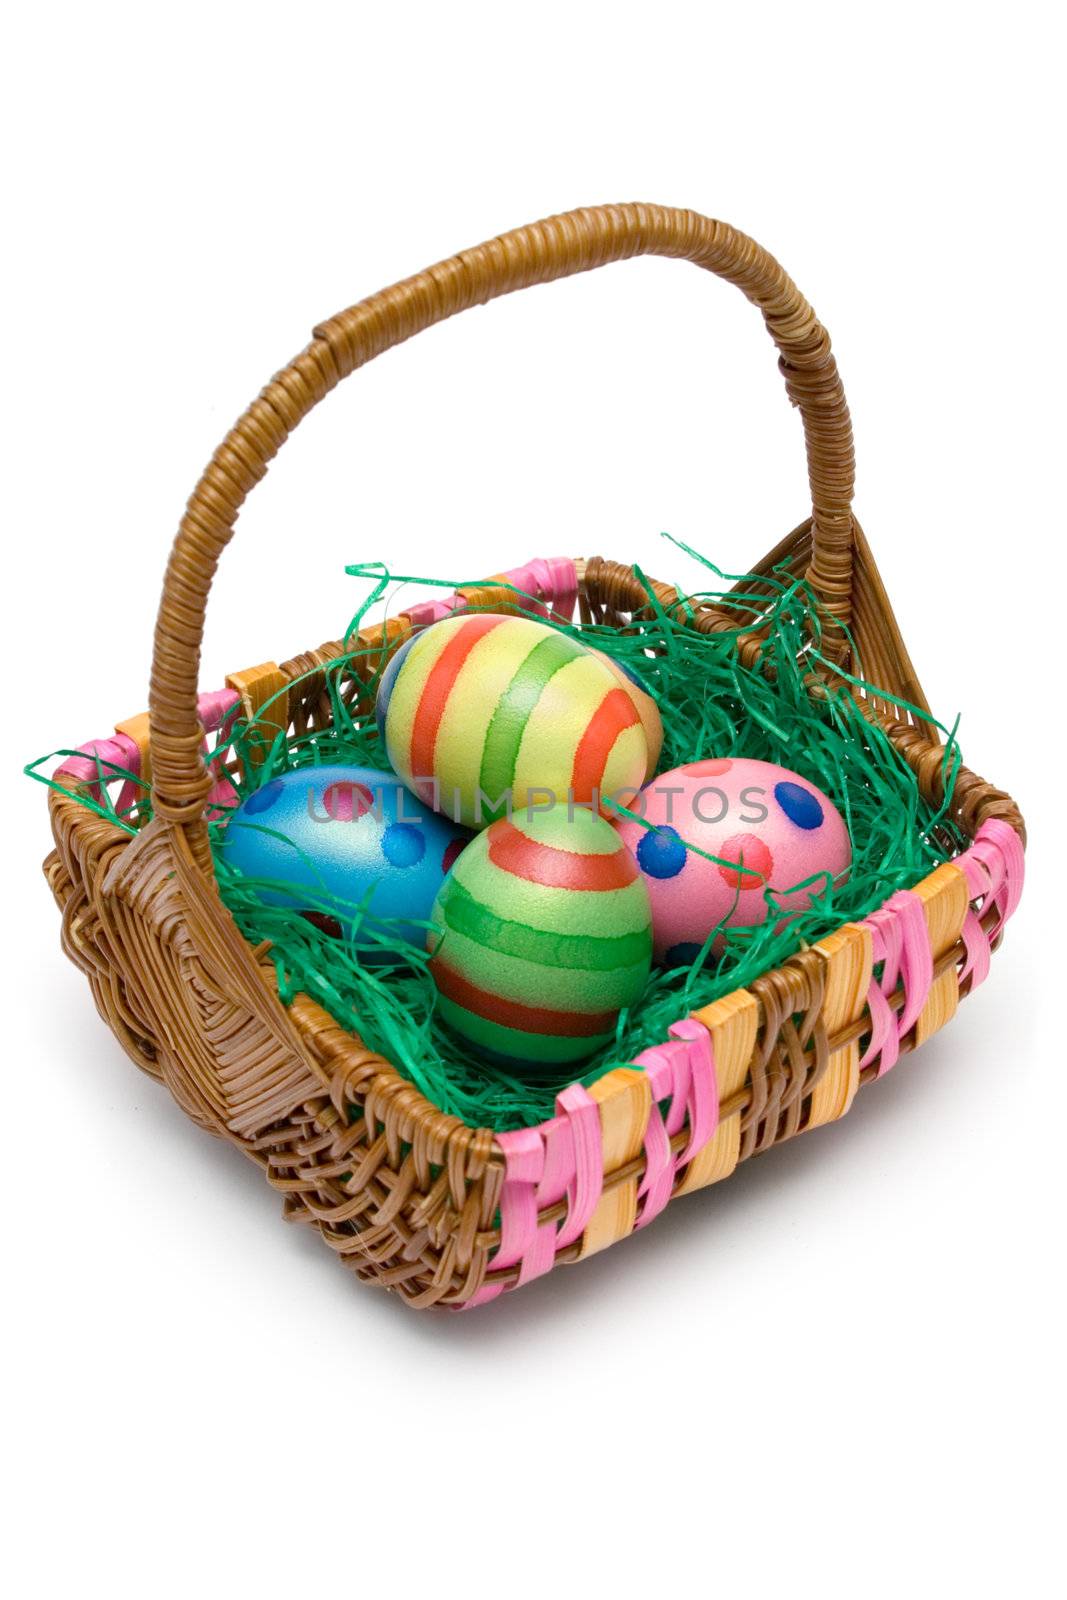 Wooden basket full of Easter eggs. Isolated on a white background.